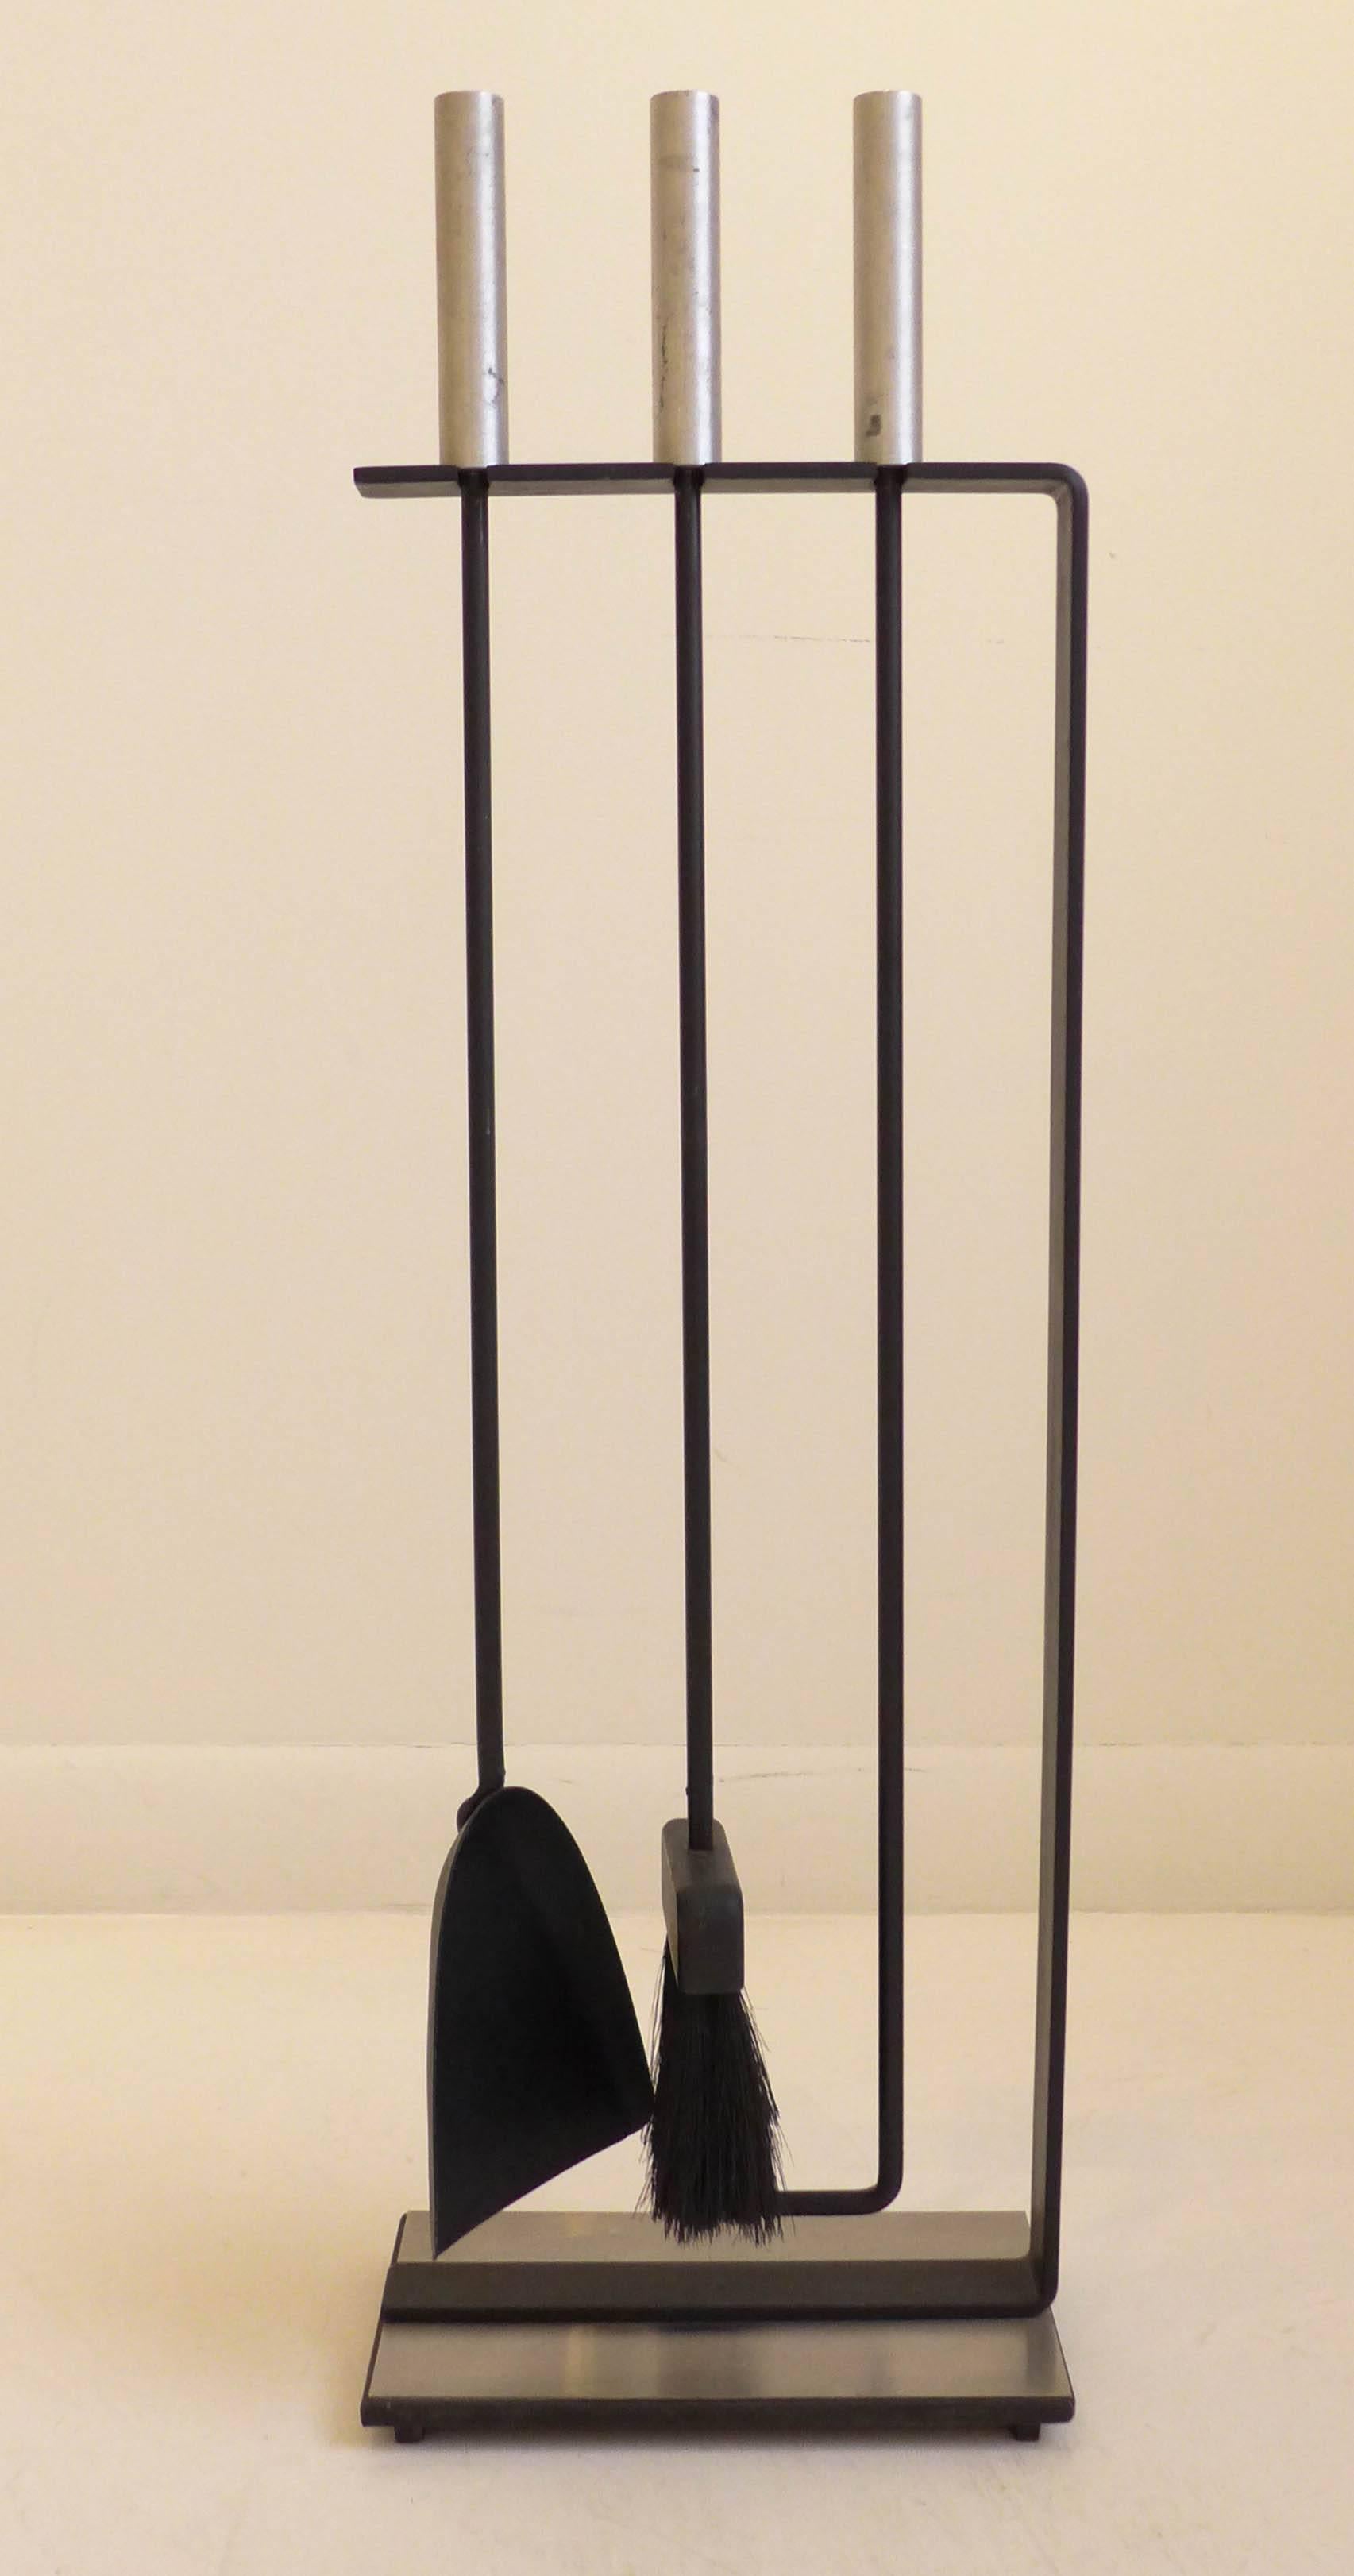 Modernist fireplace tool set of enameled steel, aluminum, and fiber. Comprising a poker, shovel, and brush. Attributed to Pilgrim manufacturing, circa 1960s.